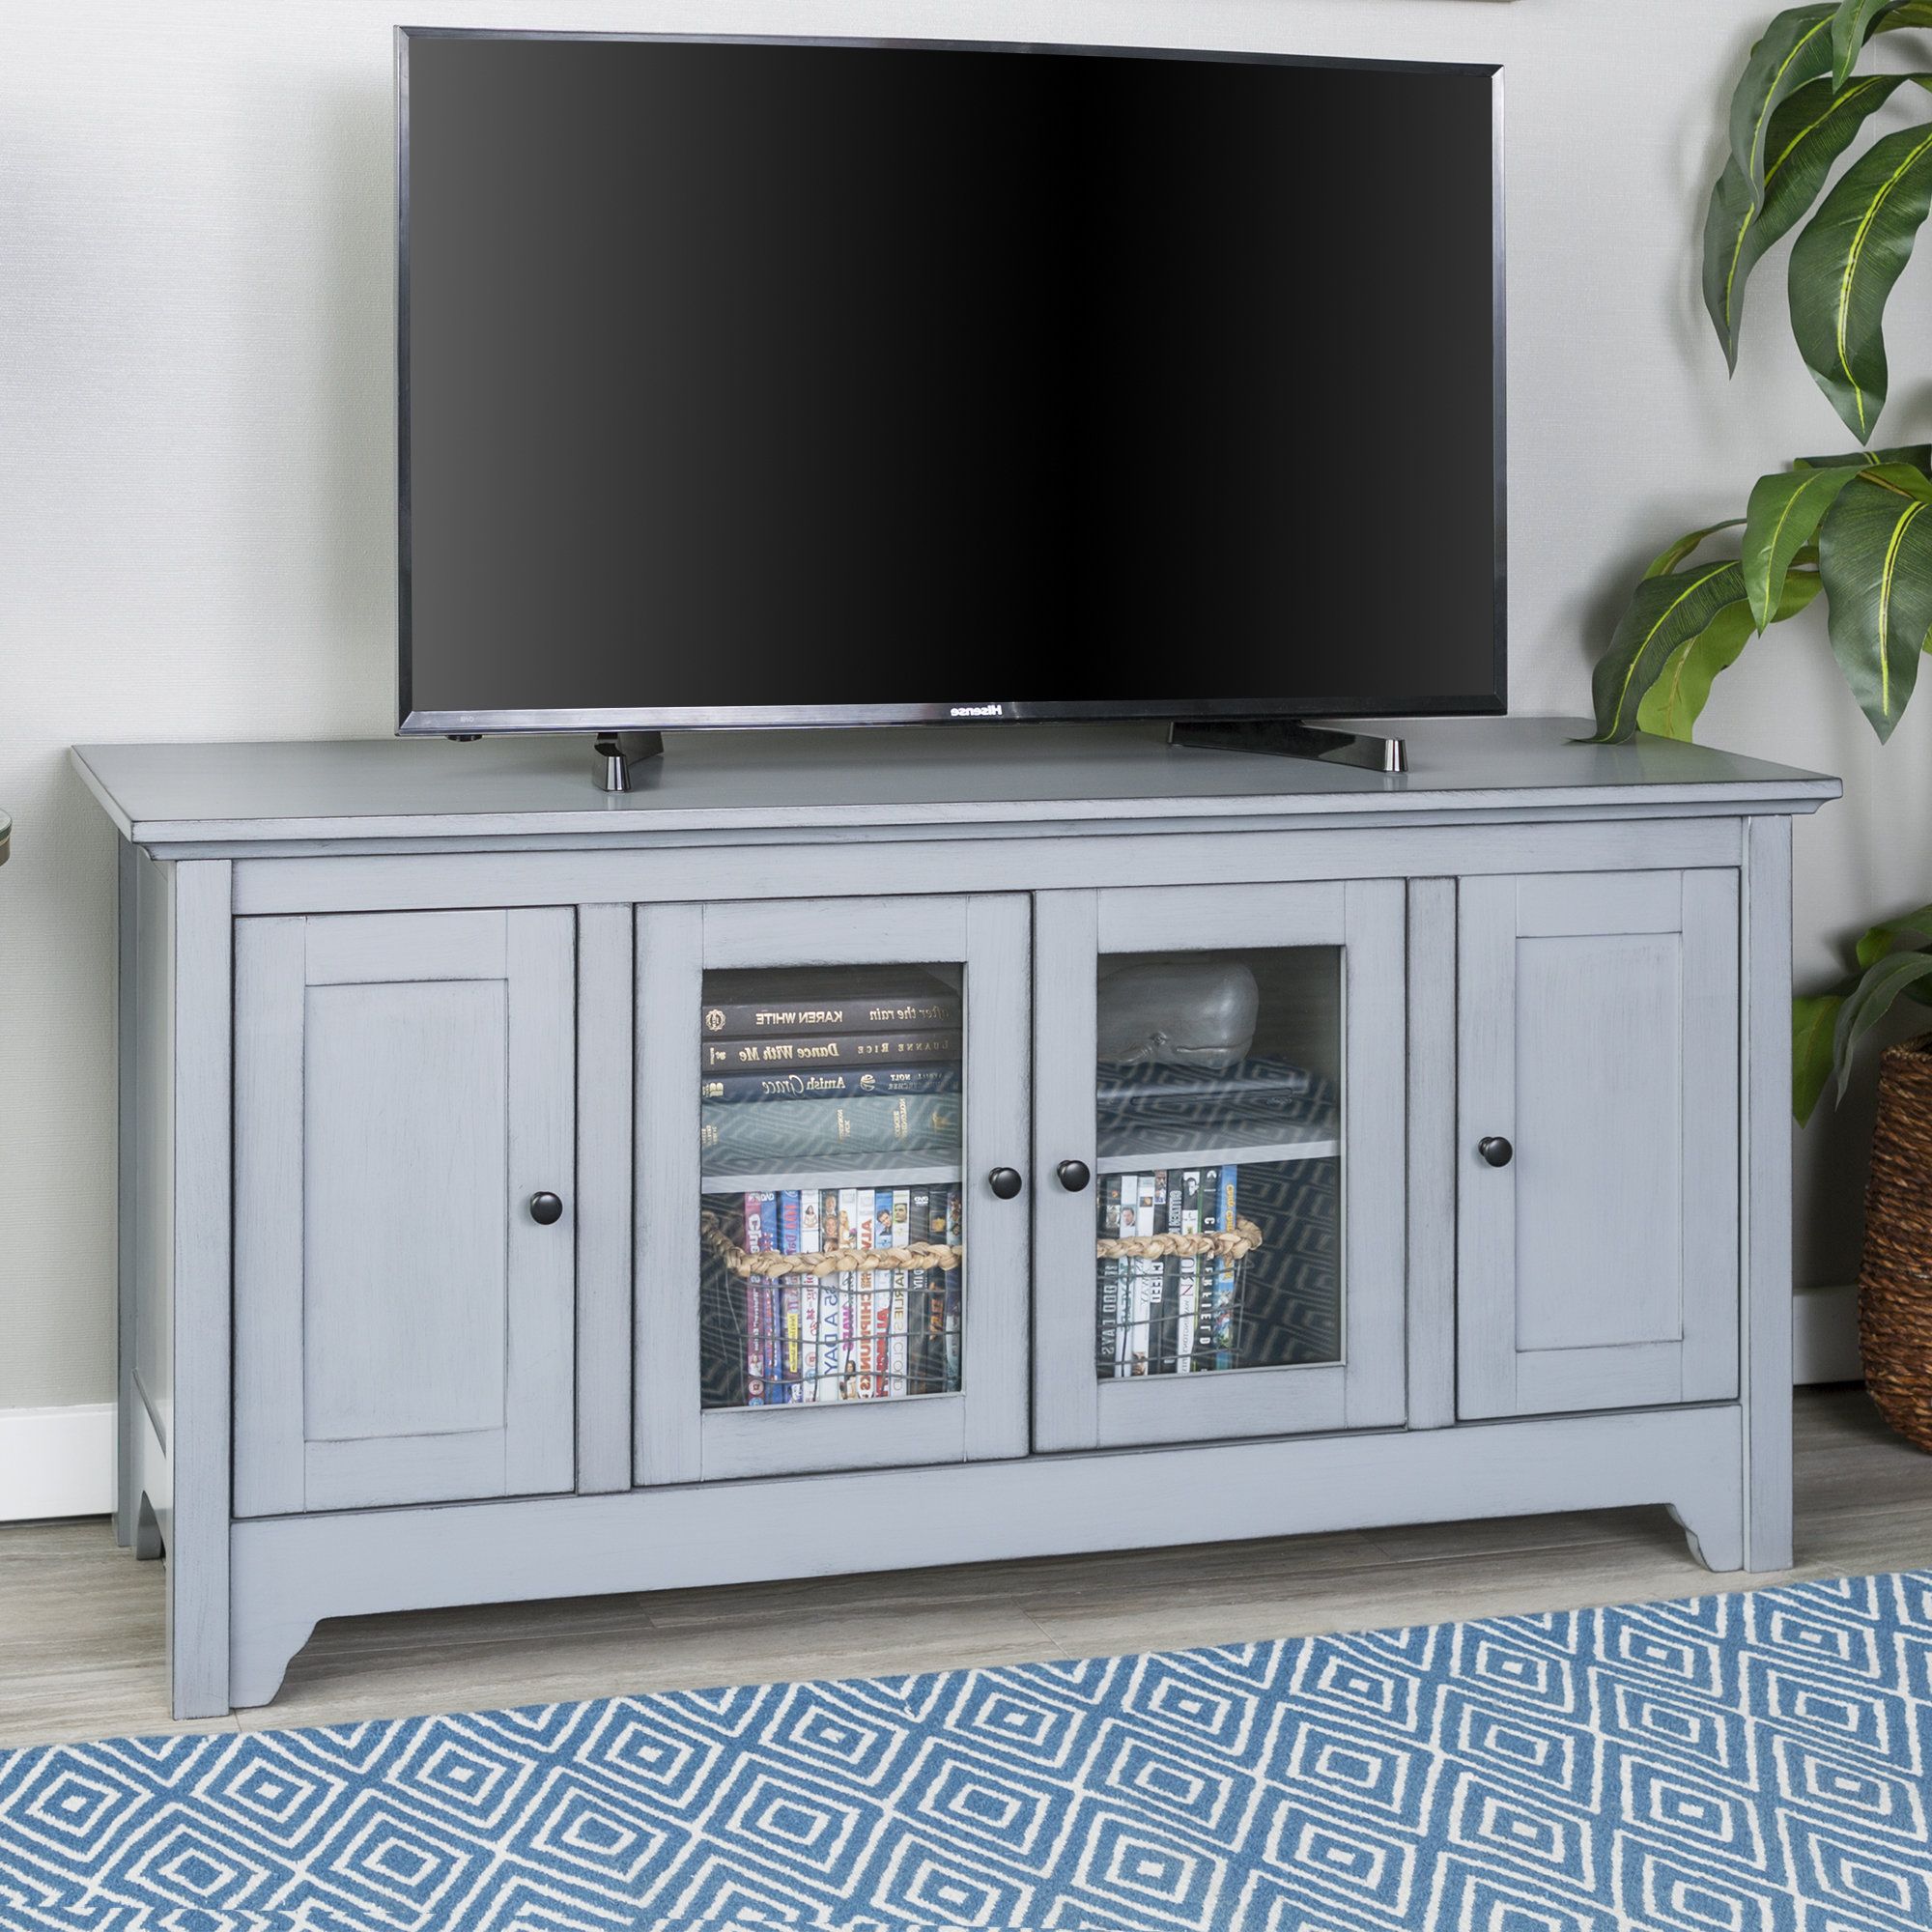 Birch Lane With Preferred Sinclair White 54 Inch Tv Stands (View 17 of 20)